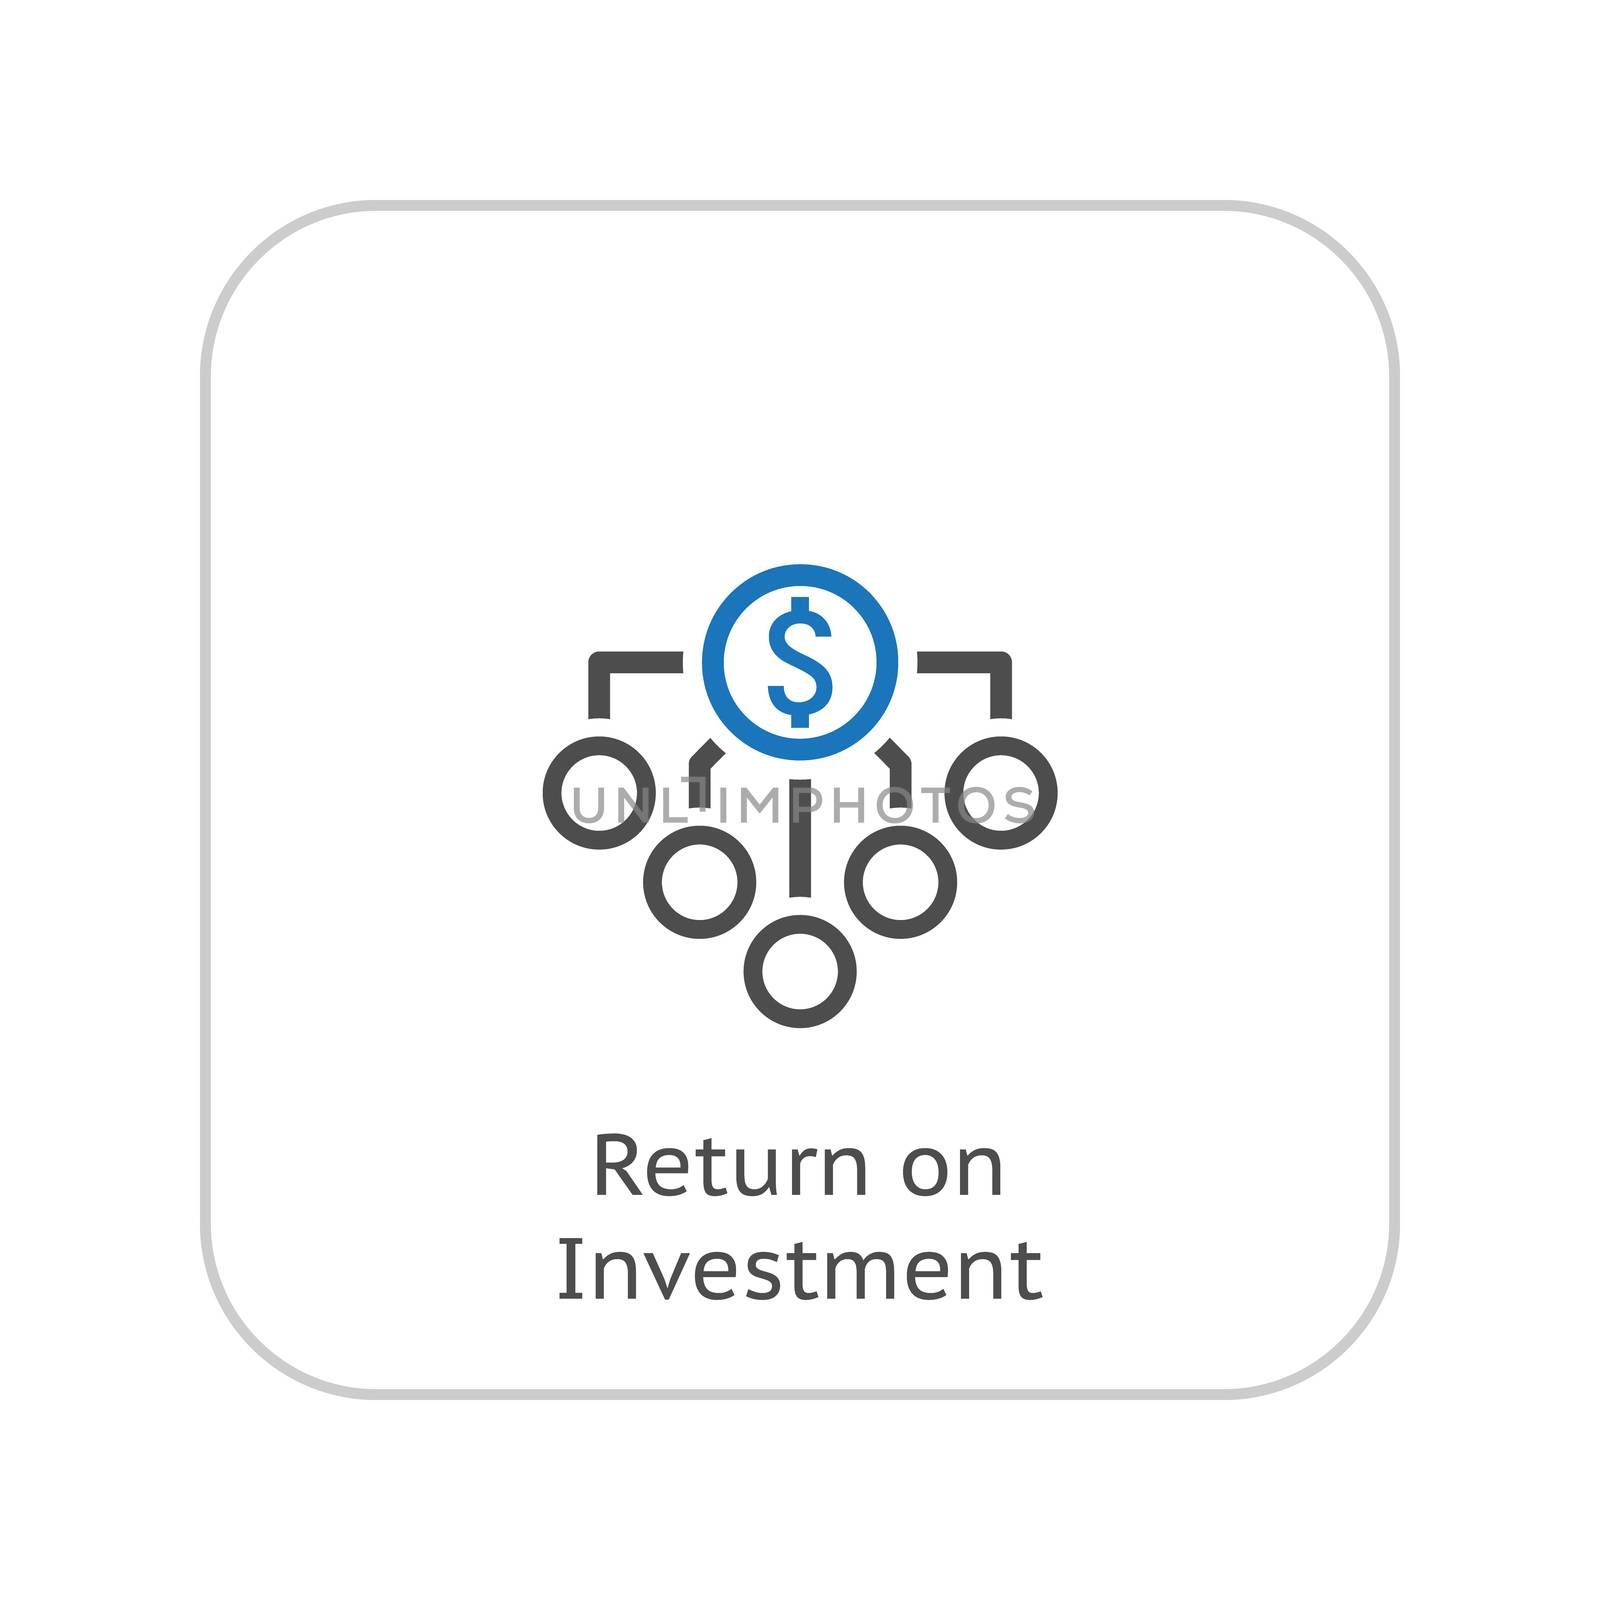 Return on Investment Icon. Business Concept. Flat Design. Isolated Illustration.